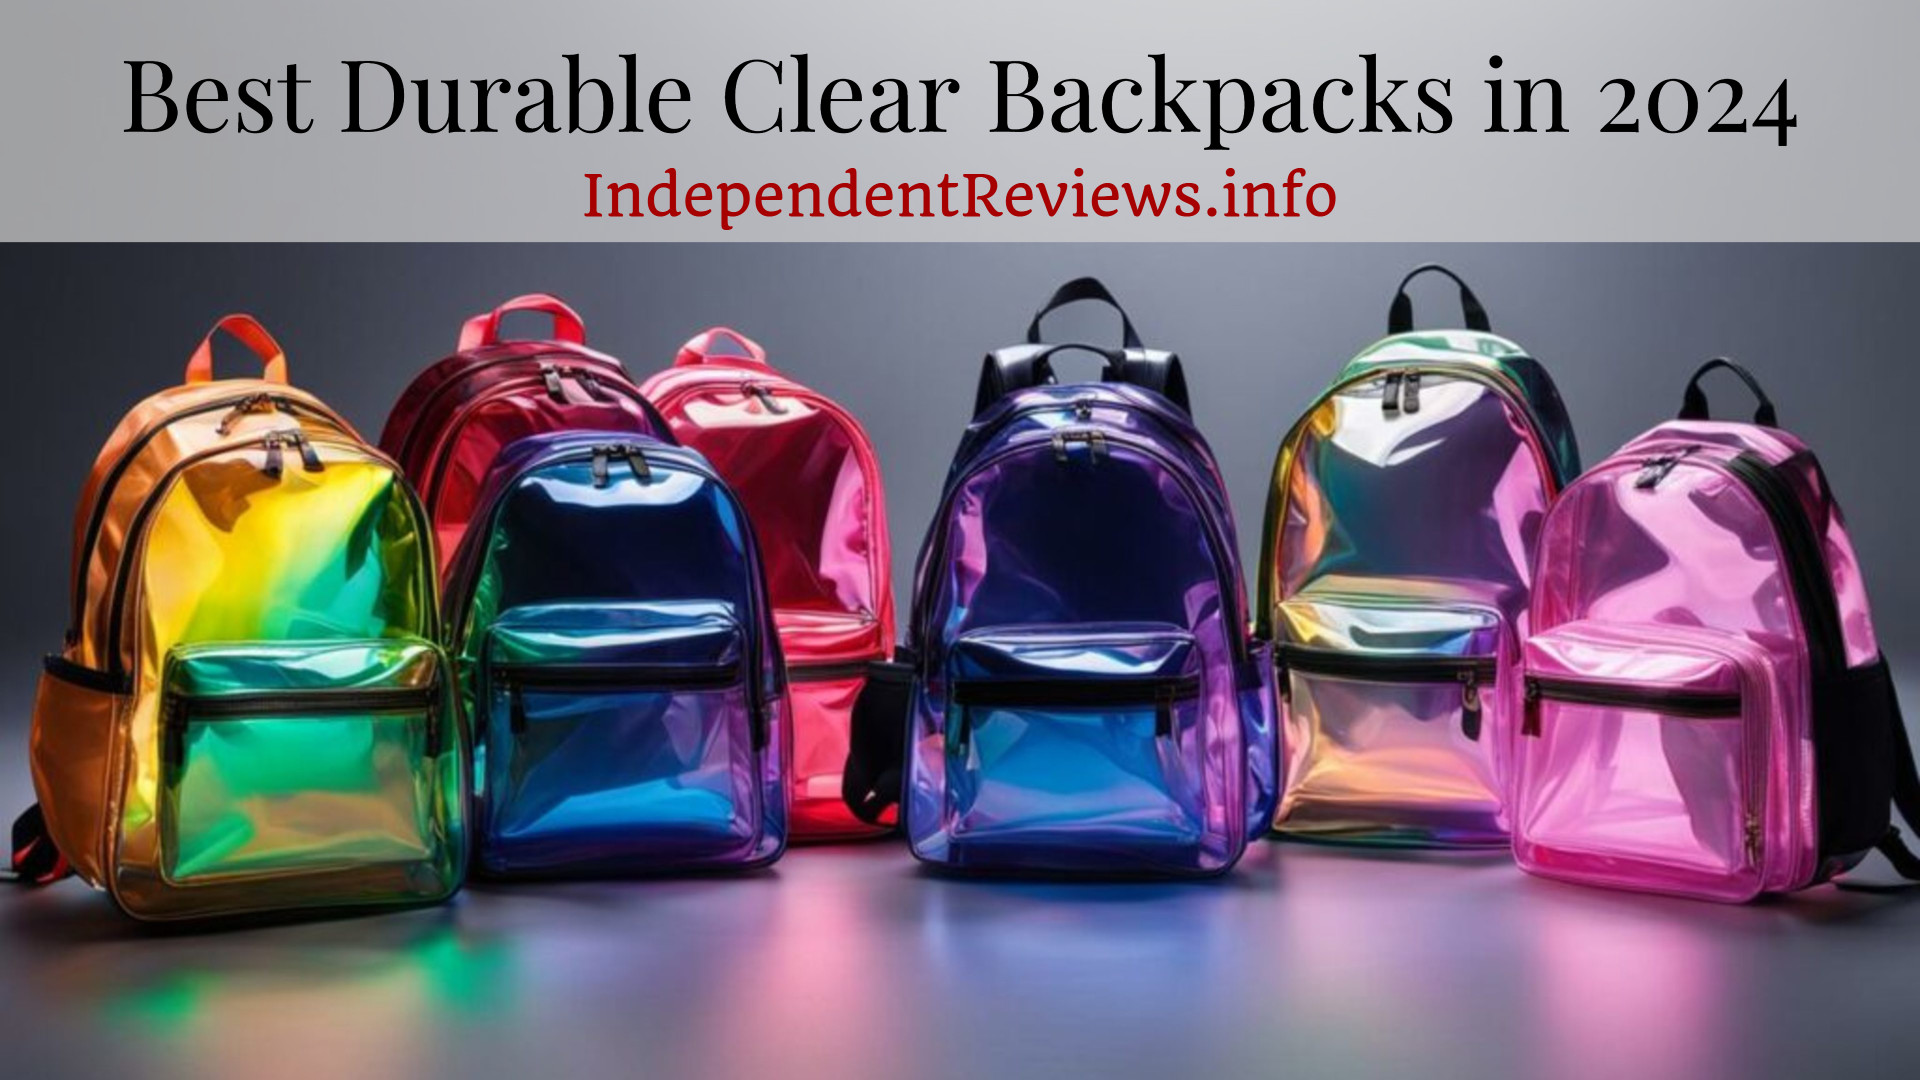 Photo of a number of colorful clear durable backpacks lined up on a table for a product test.